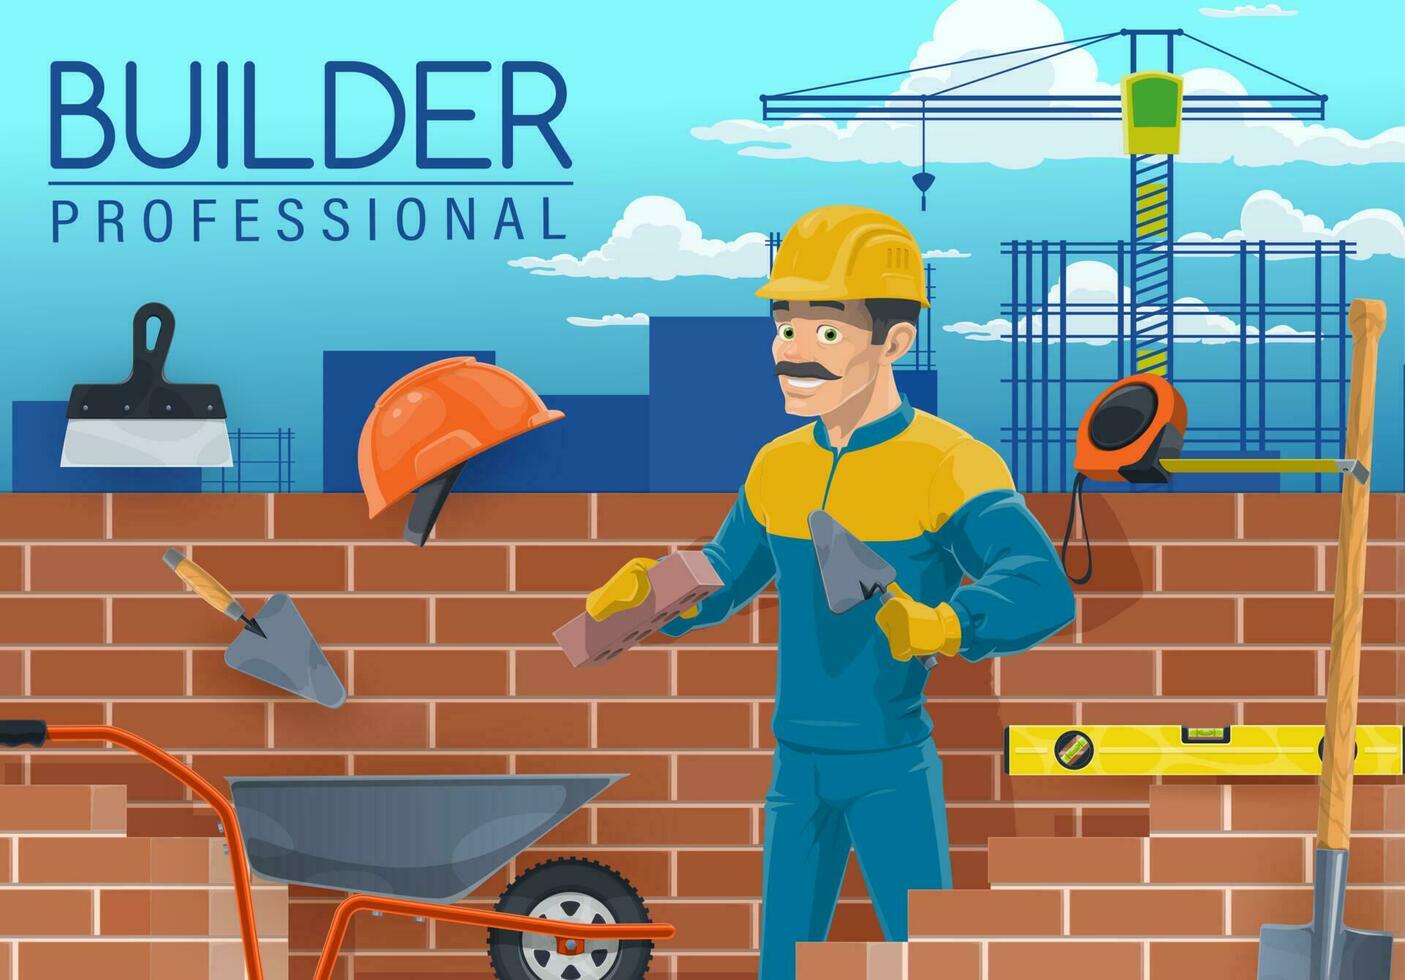 Builder with bricklayer tools, construction worker vector